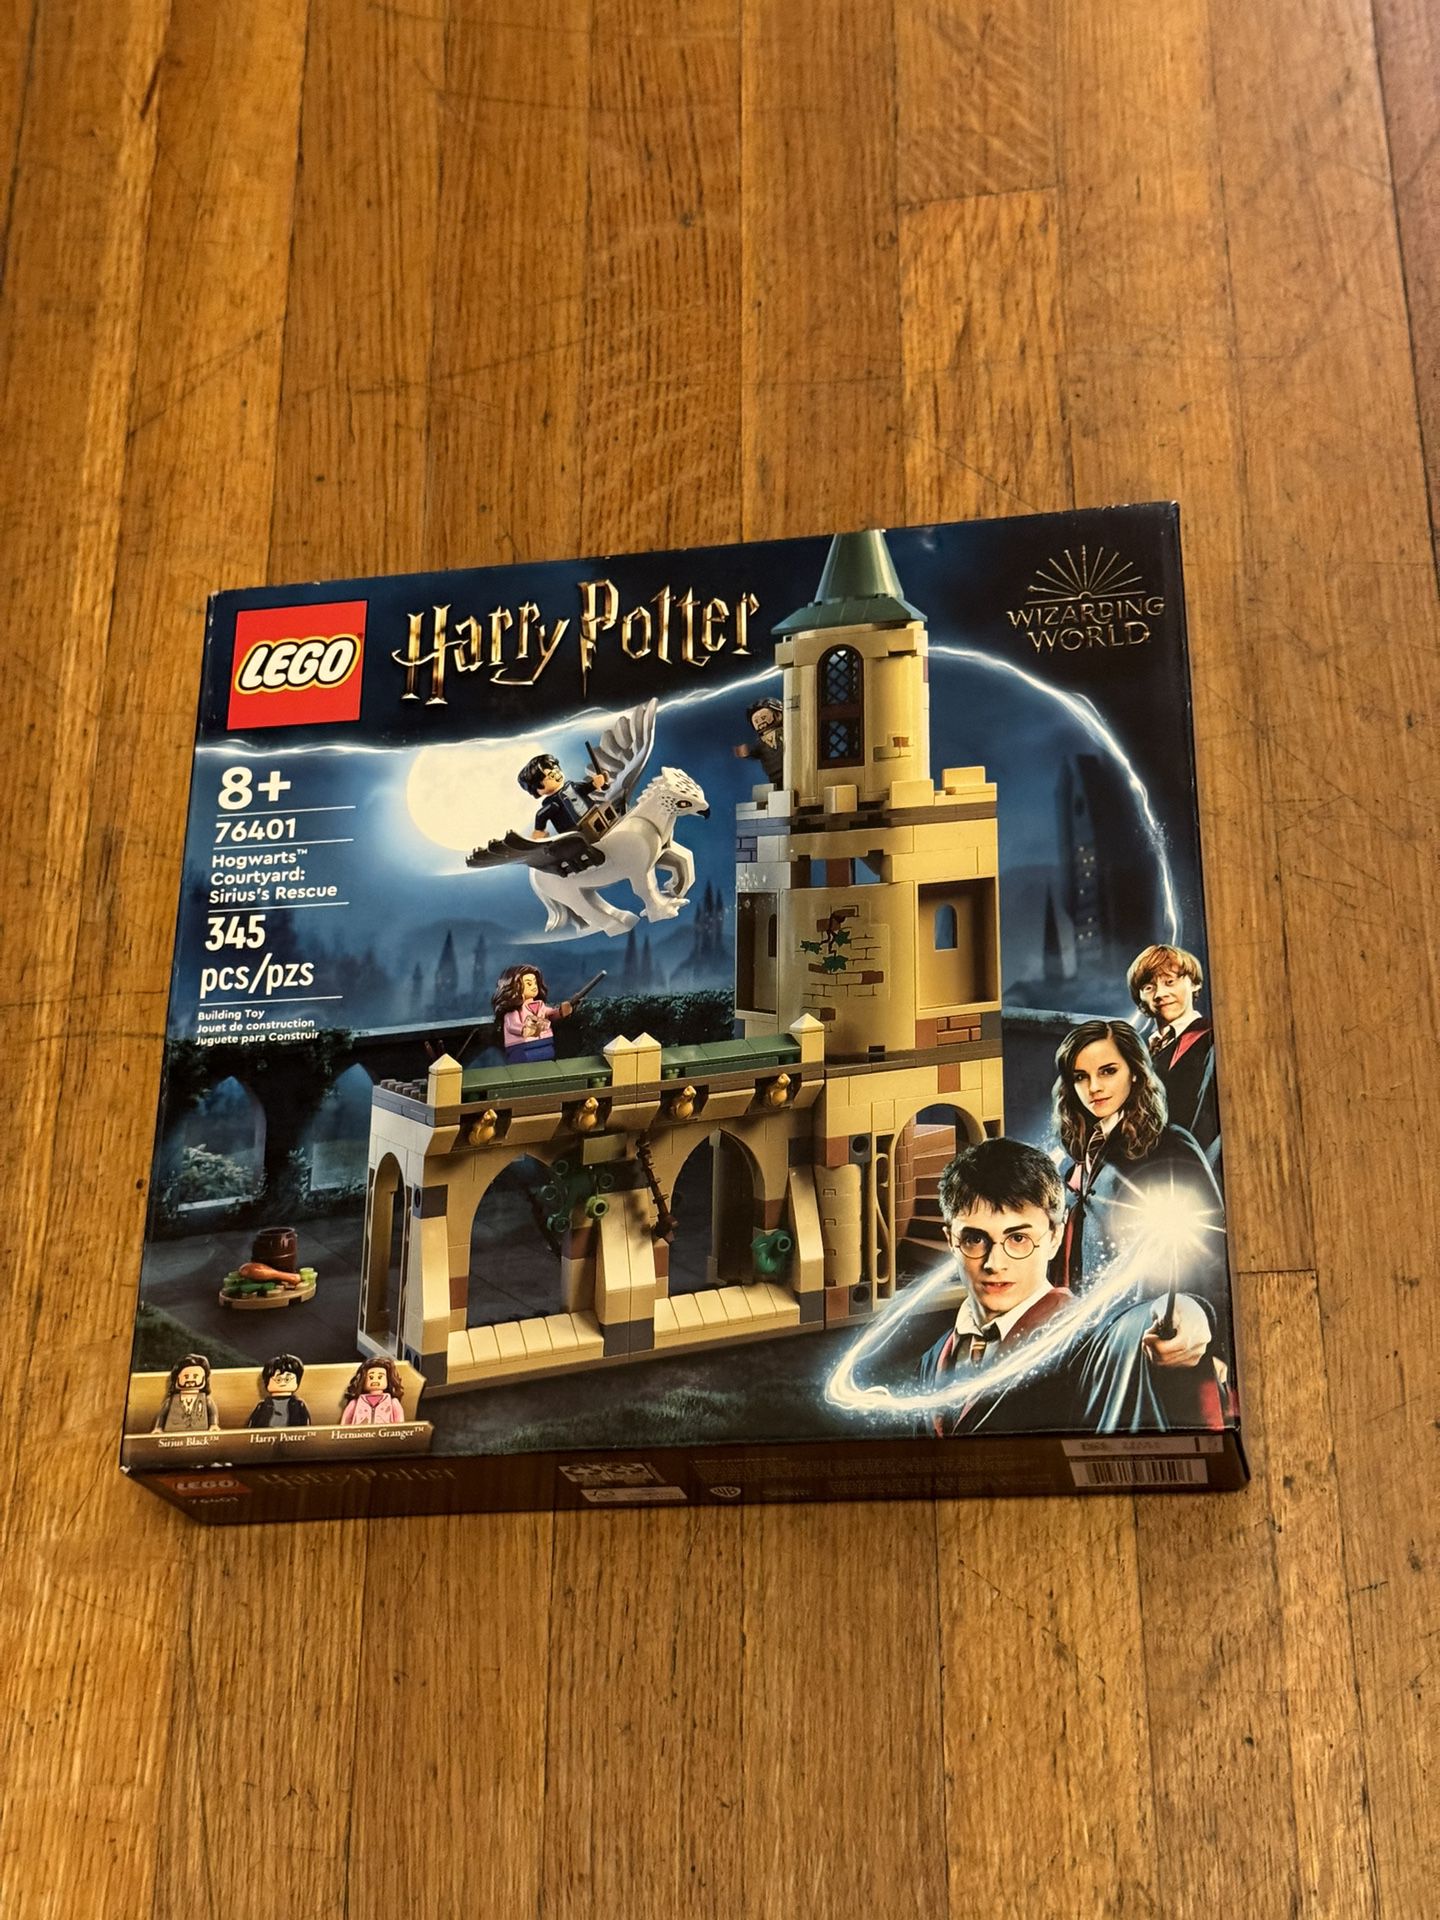 Lego Harry Potter Hogwarts Courtyard: Sirius’s Rescue (76401) Brand new